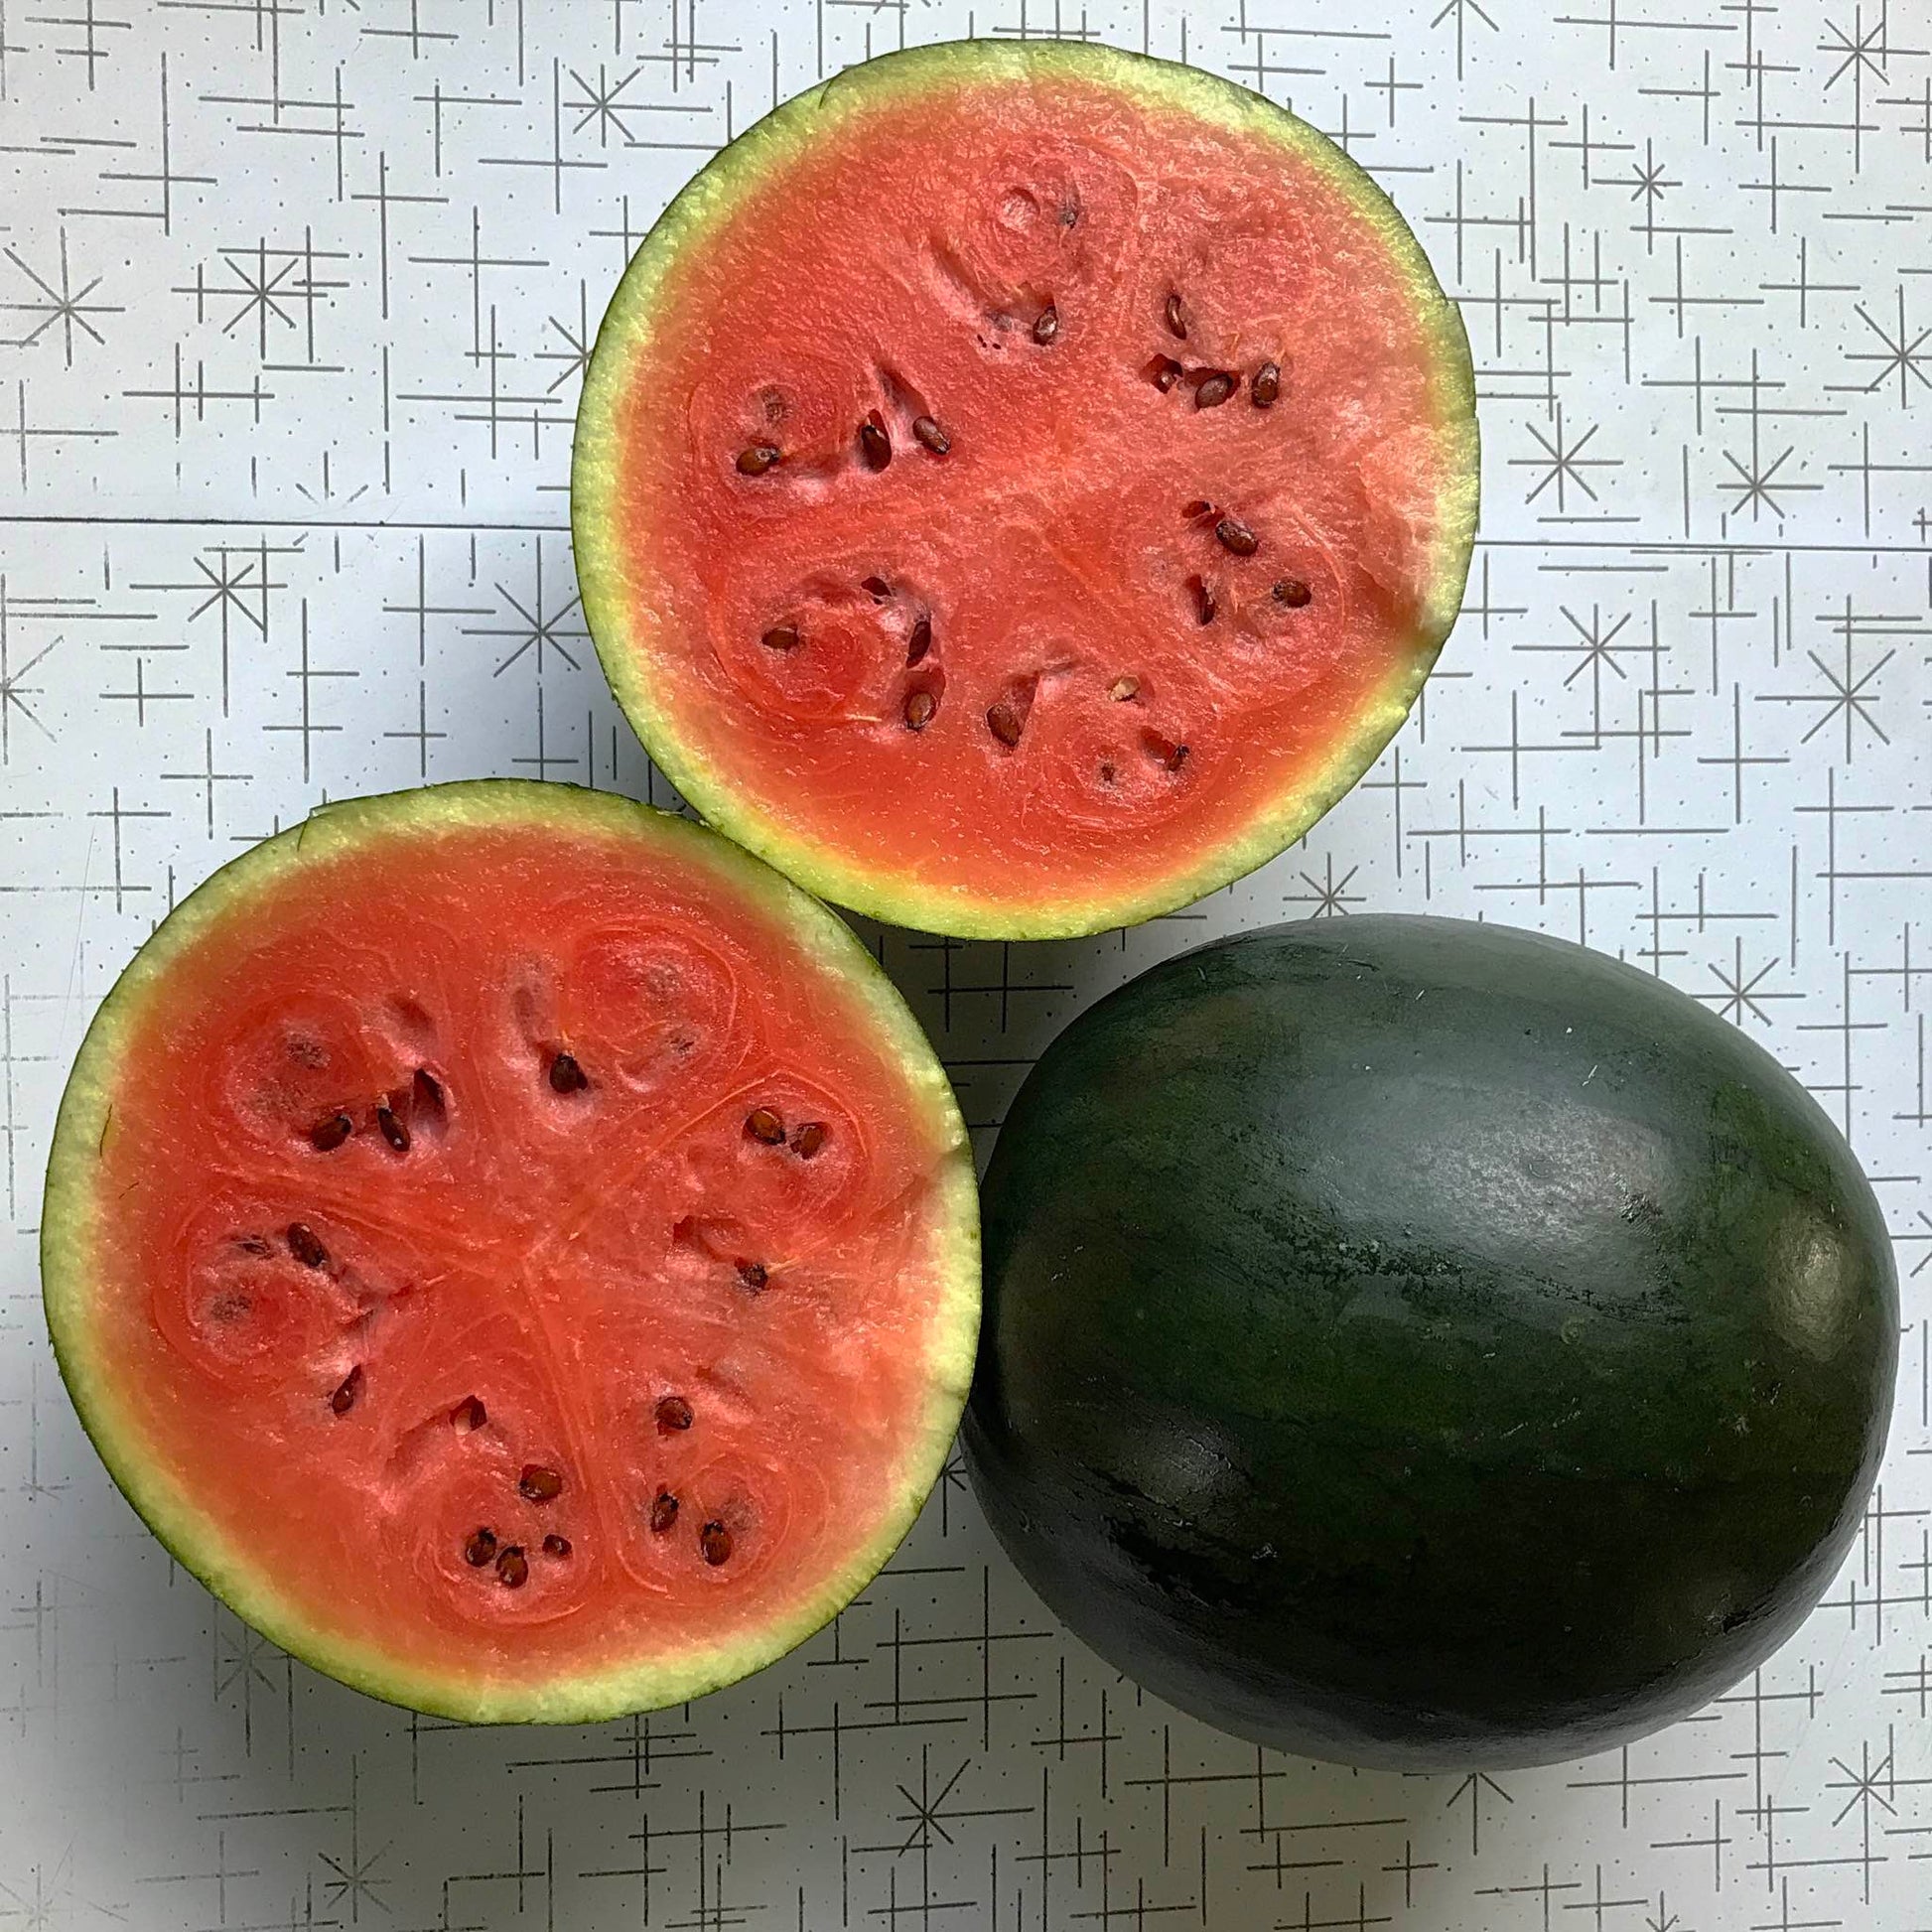 Whole dark green watermelon beside one cut in half to display its interior.